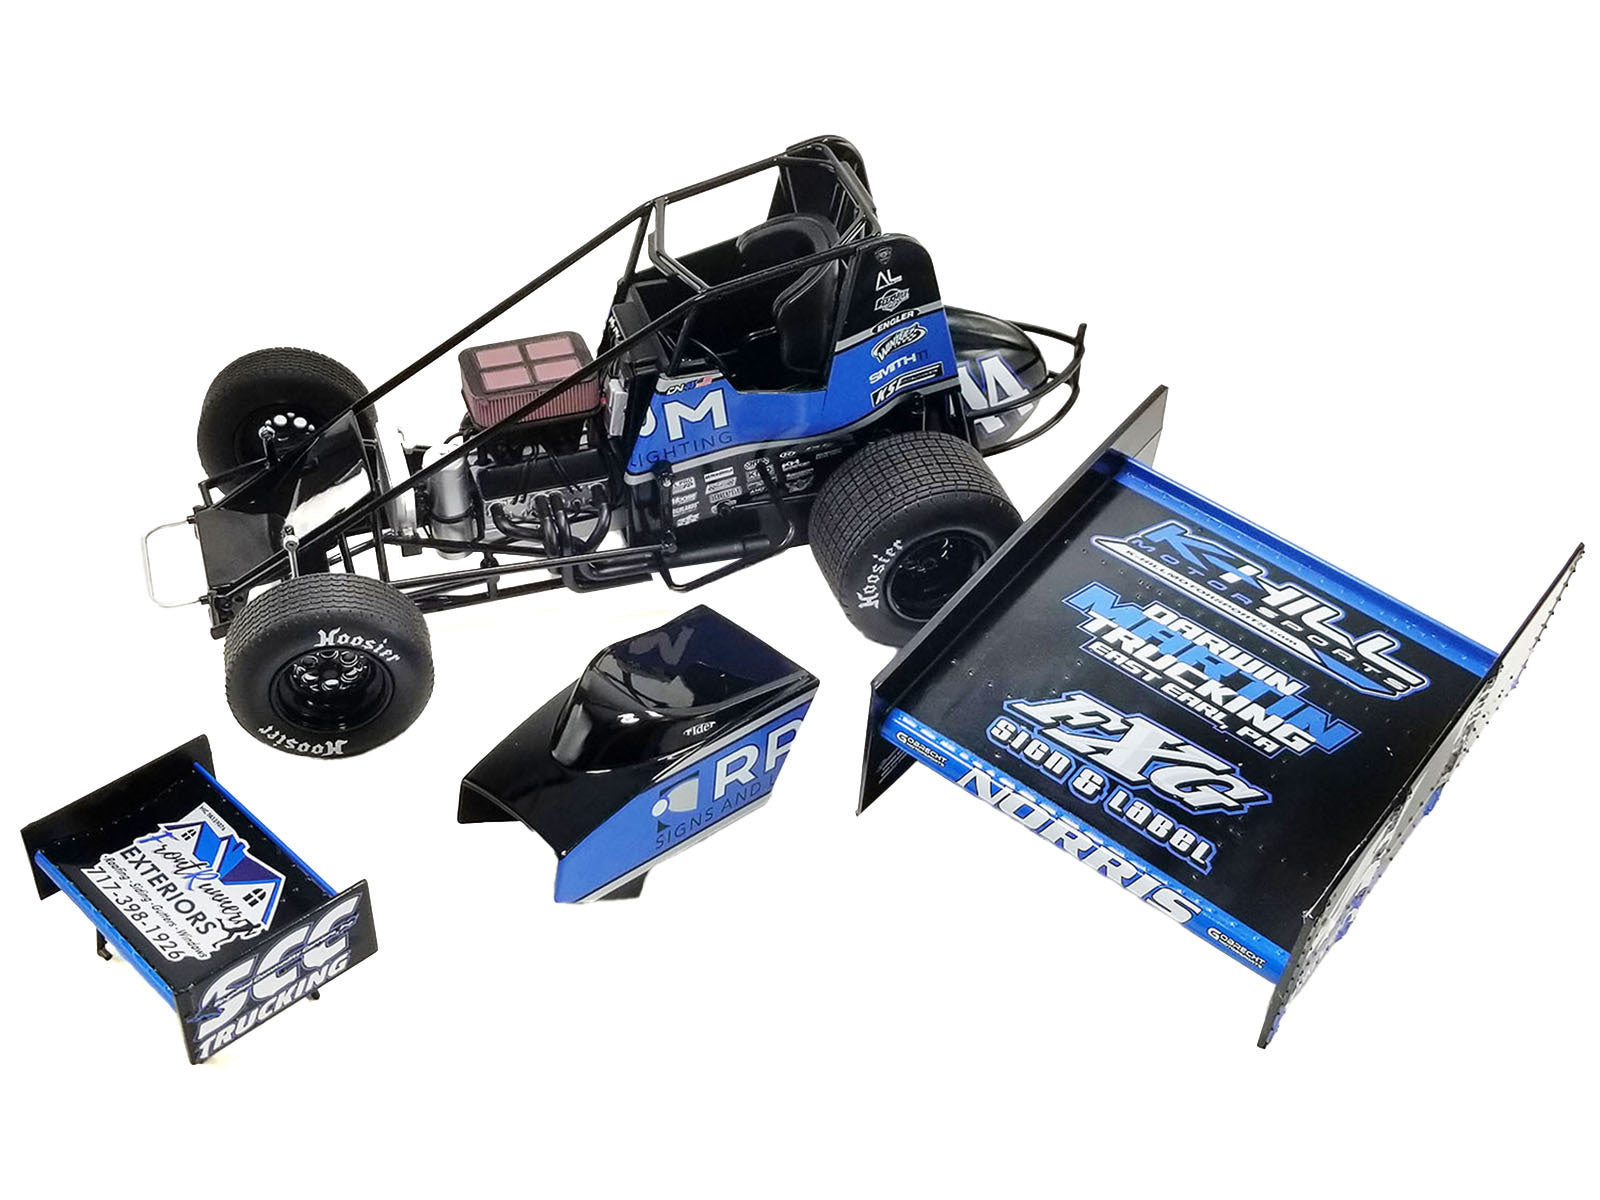 Winged Sprint Car #44 Dylan Norris "RPM" Gobrecht Motorsports "World of Outlaws" (2023) 1/18 Diecast Model Car by ACME